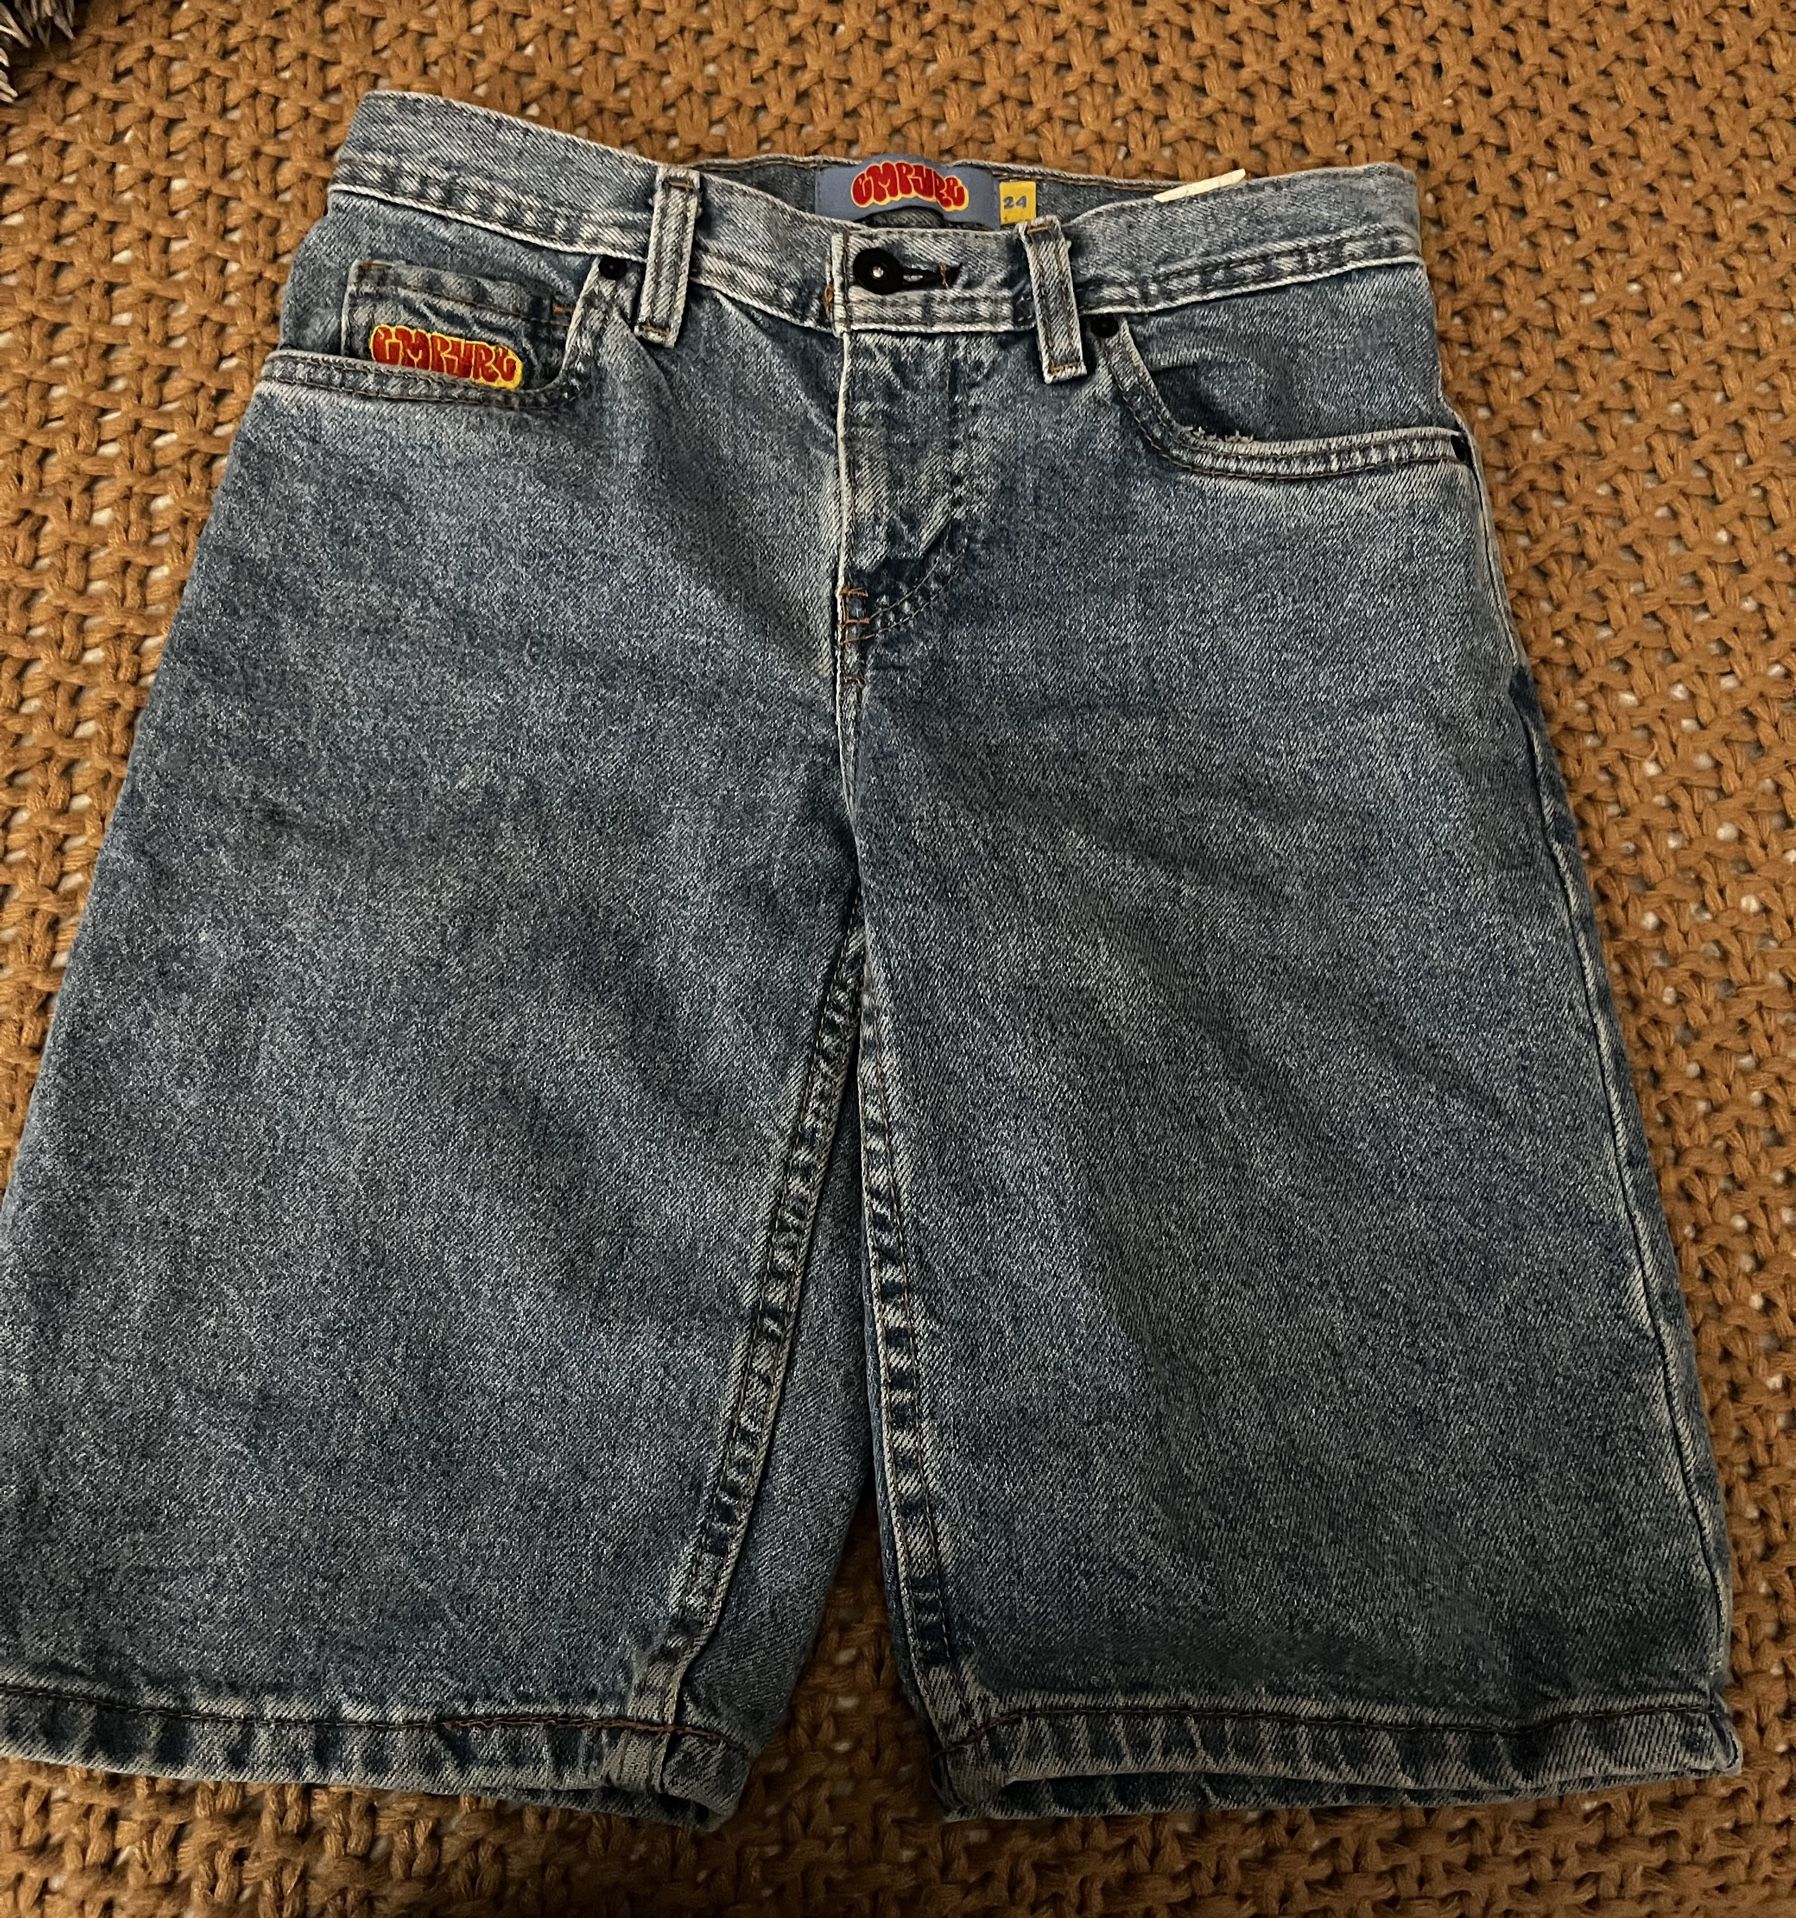 empyre jorts for Sale in Goodyear, AZ - OfferUp